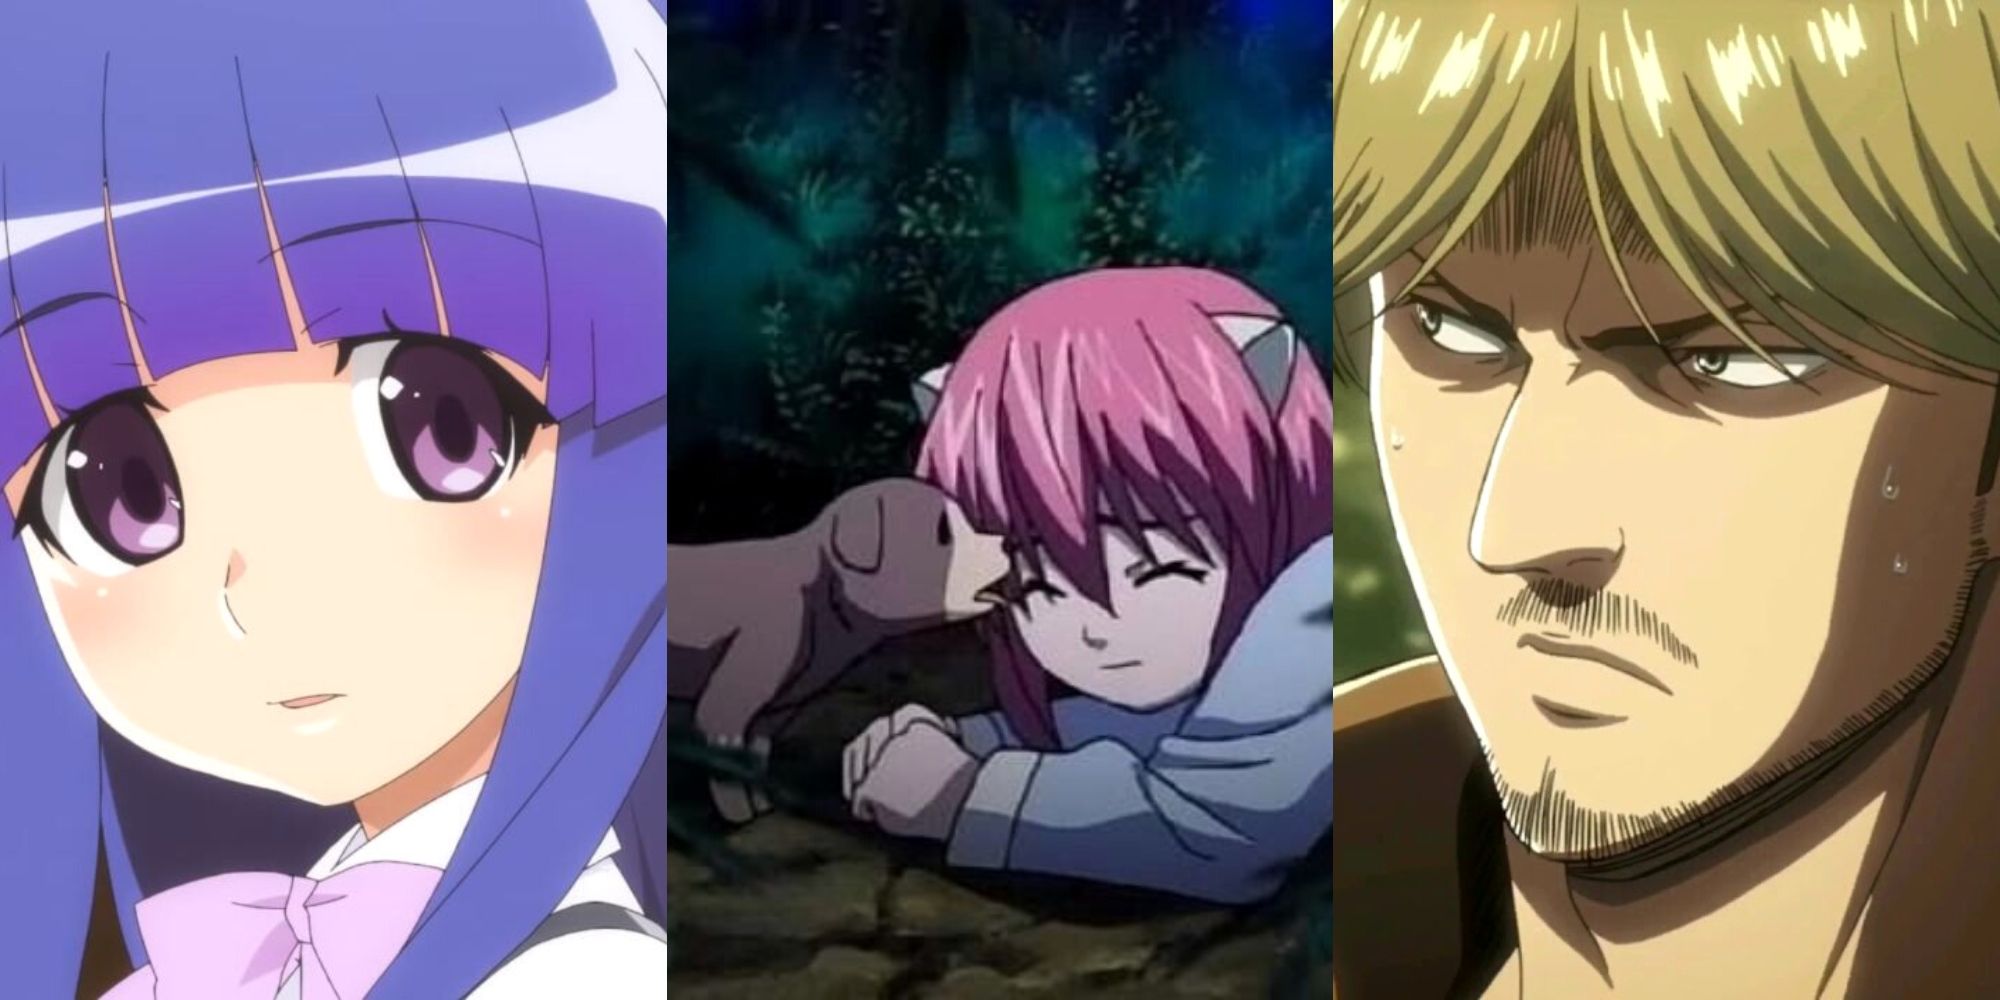 Rika Furude in Higurashi When They Cry, puppy and Lucy in Elfen Lied, Mike Zacharias in Attack On Titan